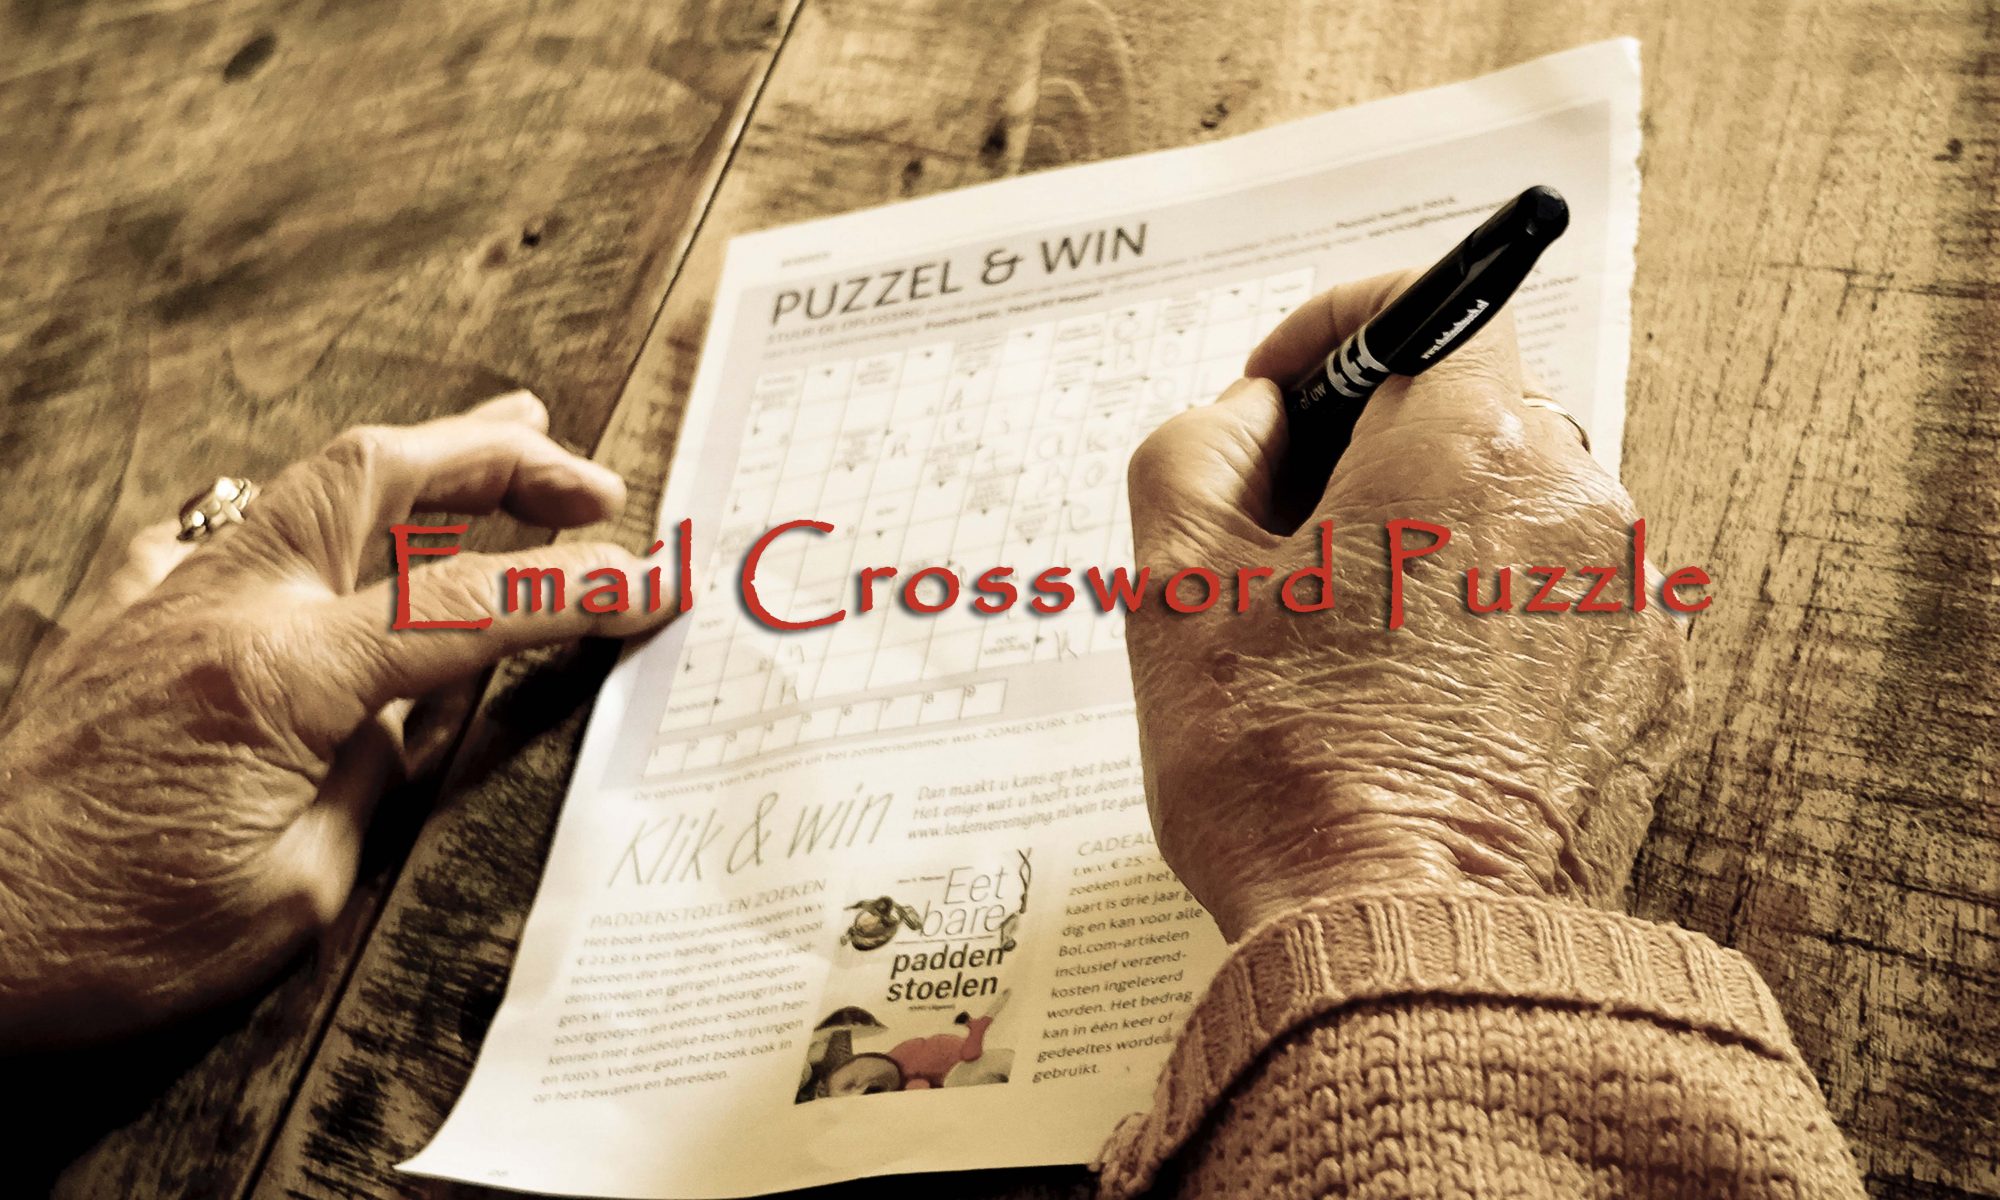 Email Crossword Puzzle – Thank You For Your Business